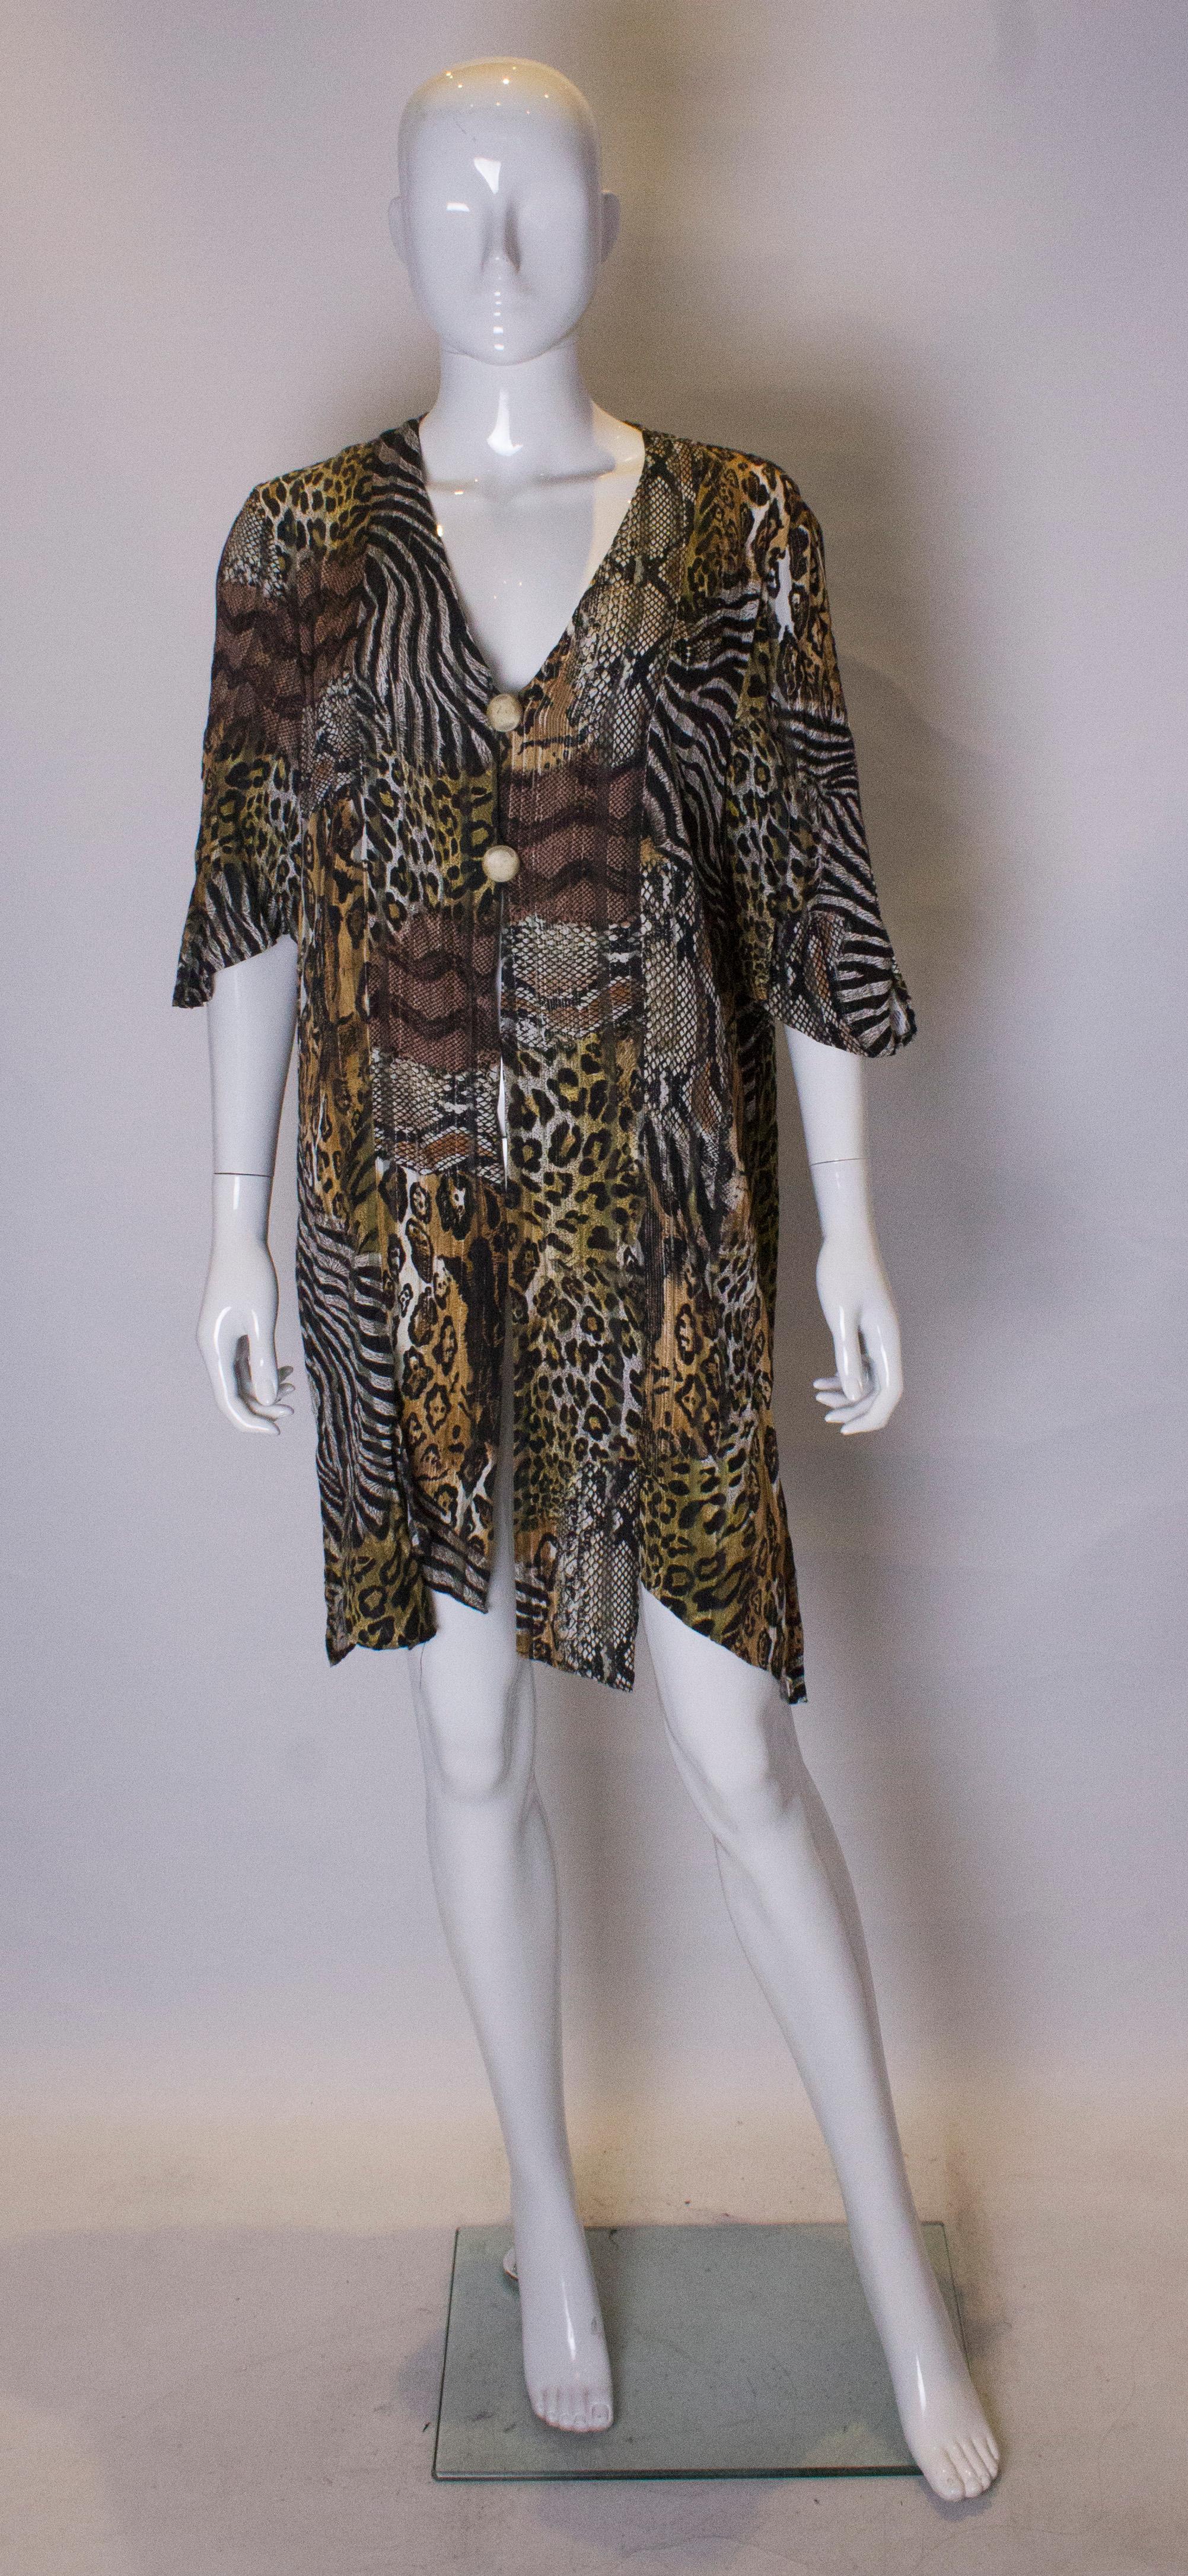 An easy to wear vintage  jacket /mini dress in an attractive animal print. The jacket has short sleaves , a two button fastening, v neckline and 4 '' slits at the front and back. It is unlined. Measurements: Bust  up to 40'', length 38''